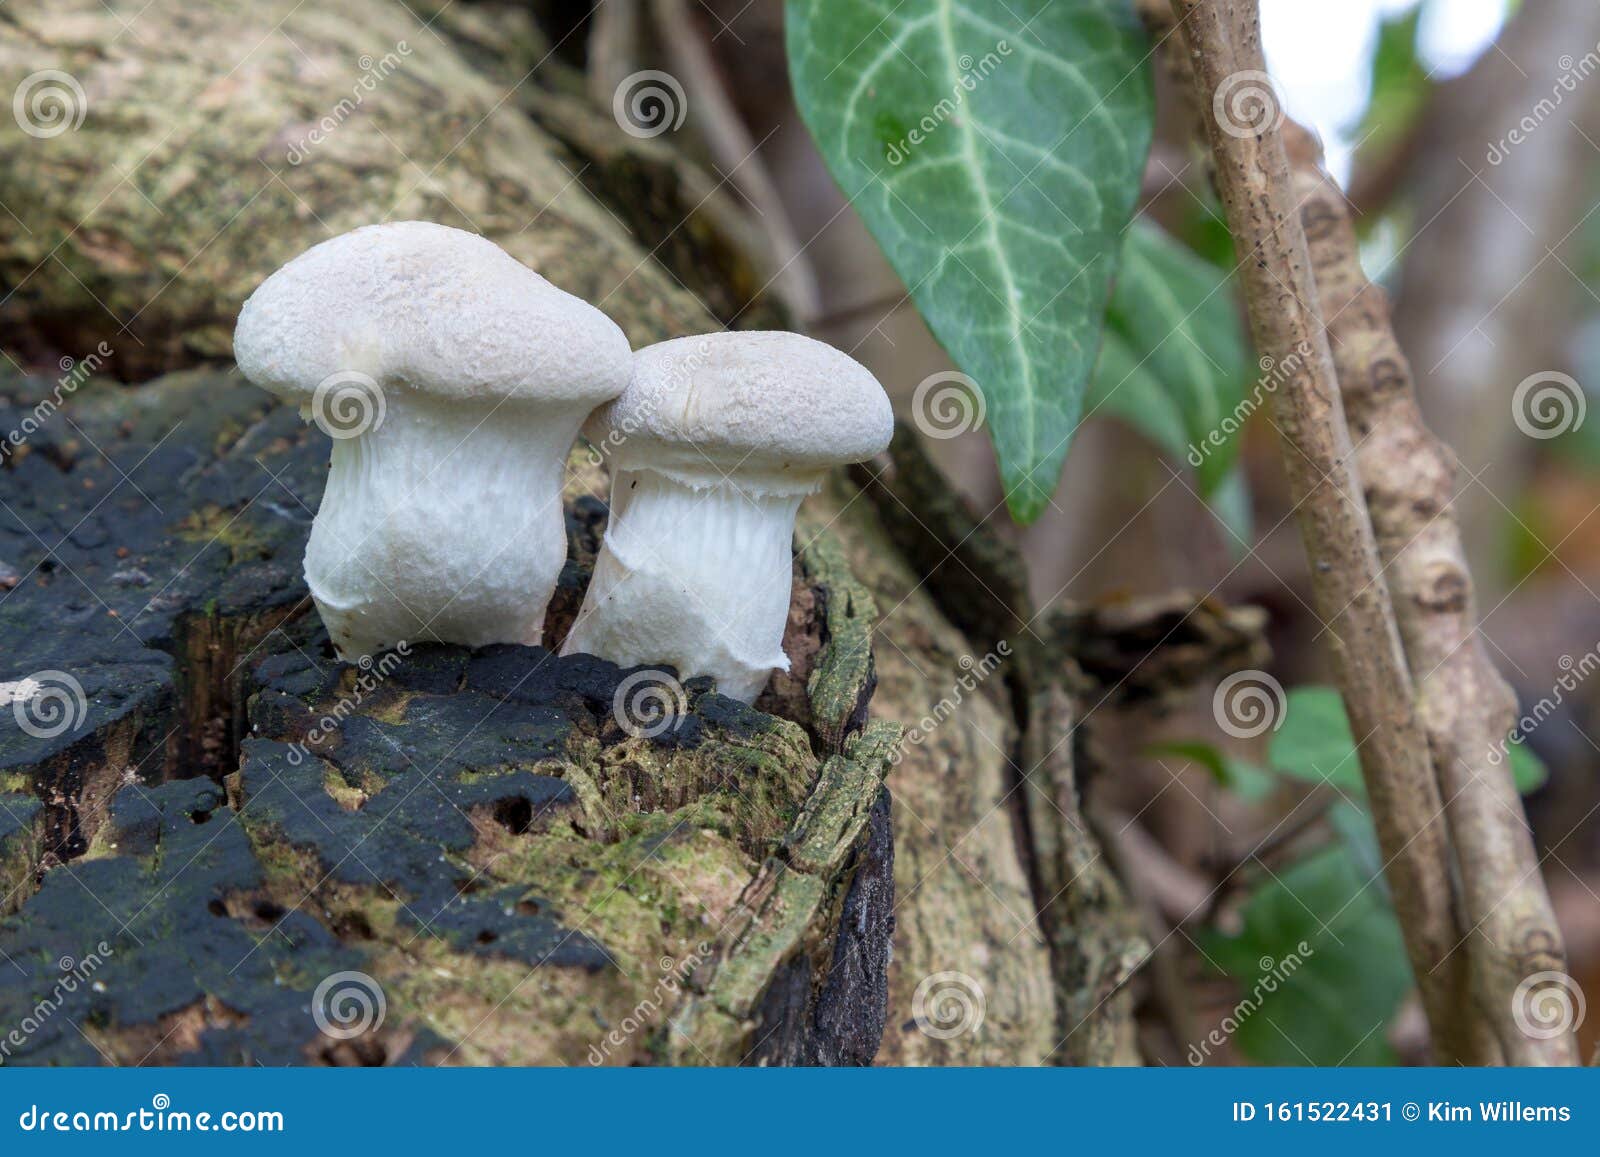 lycoperdon pratense, known as meadow puffball, is commonly seen in sand dune systems, where it can be abundant in dune slacks